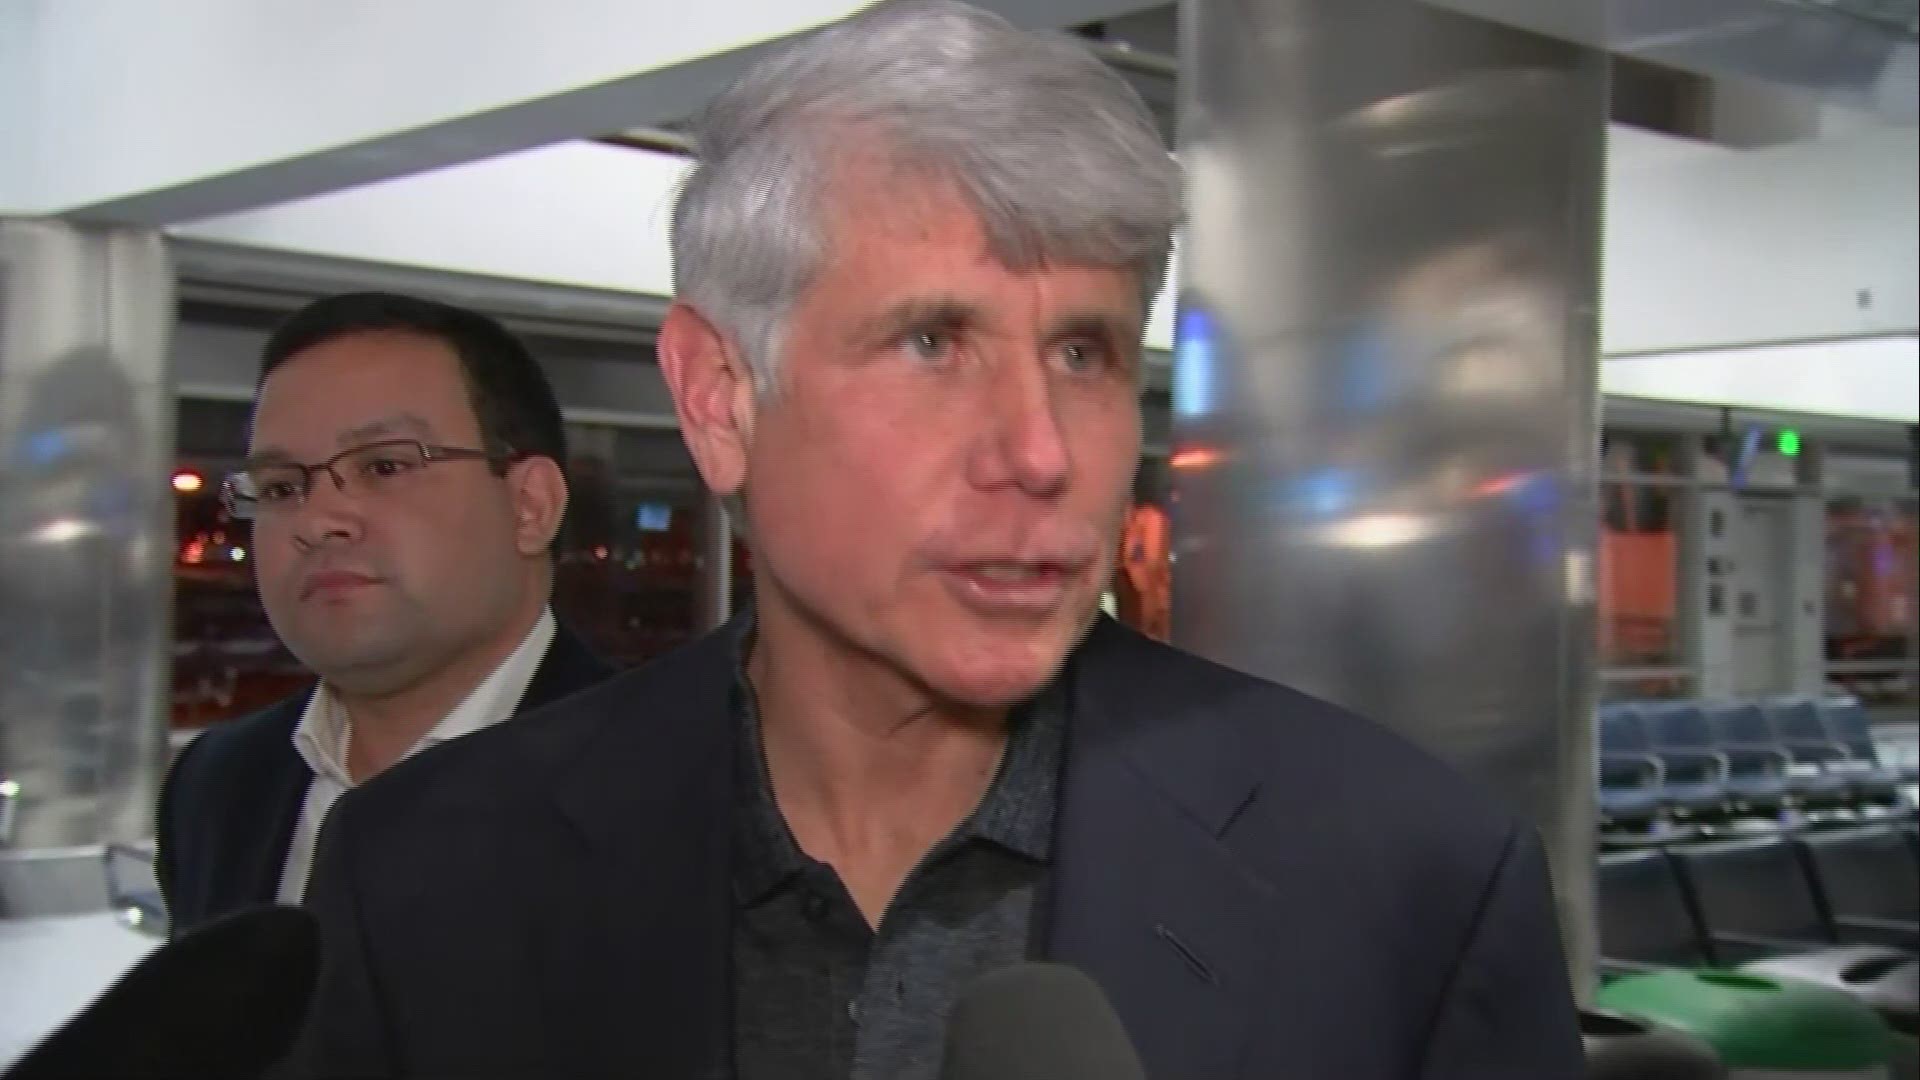 Blagojevich left the gates of the Federal Corrections Institution Englewood after his sentence for political corruption was commuted by President Trump.